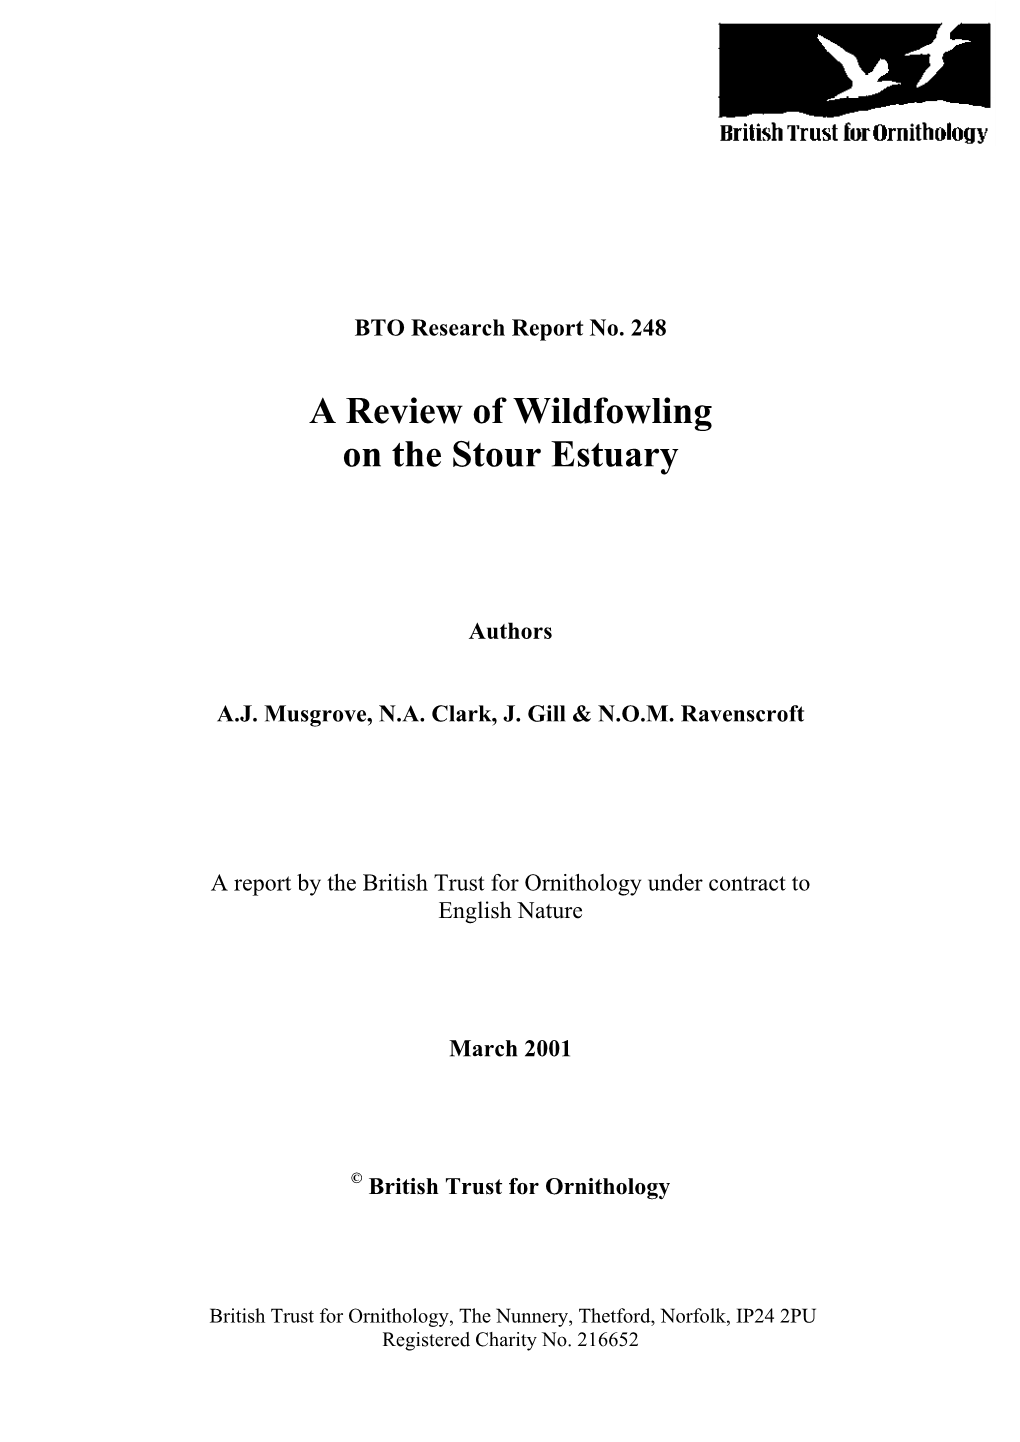 A Review of Wildfowling on the Stour Estuary